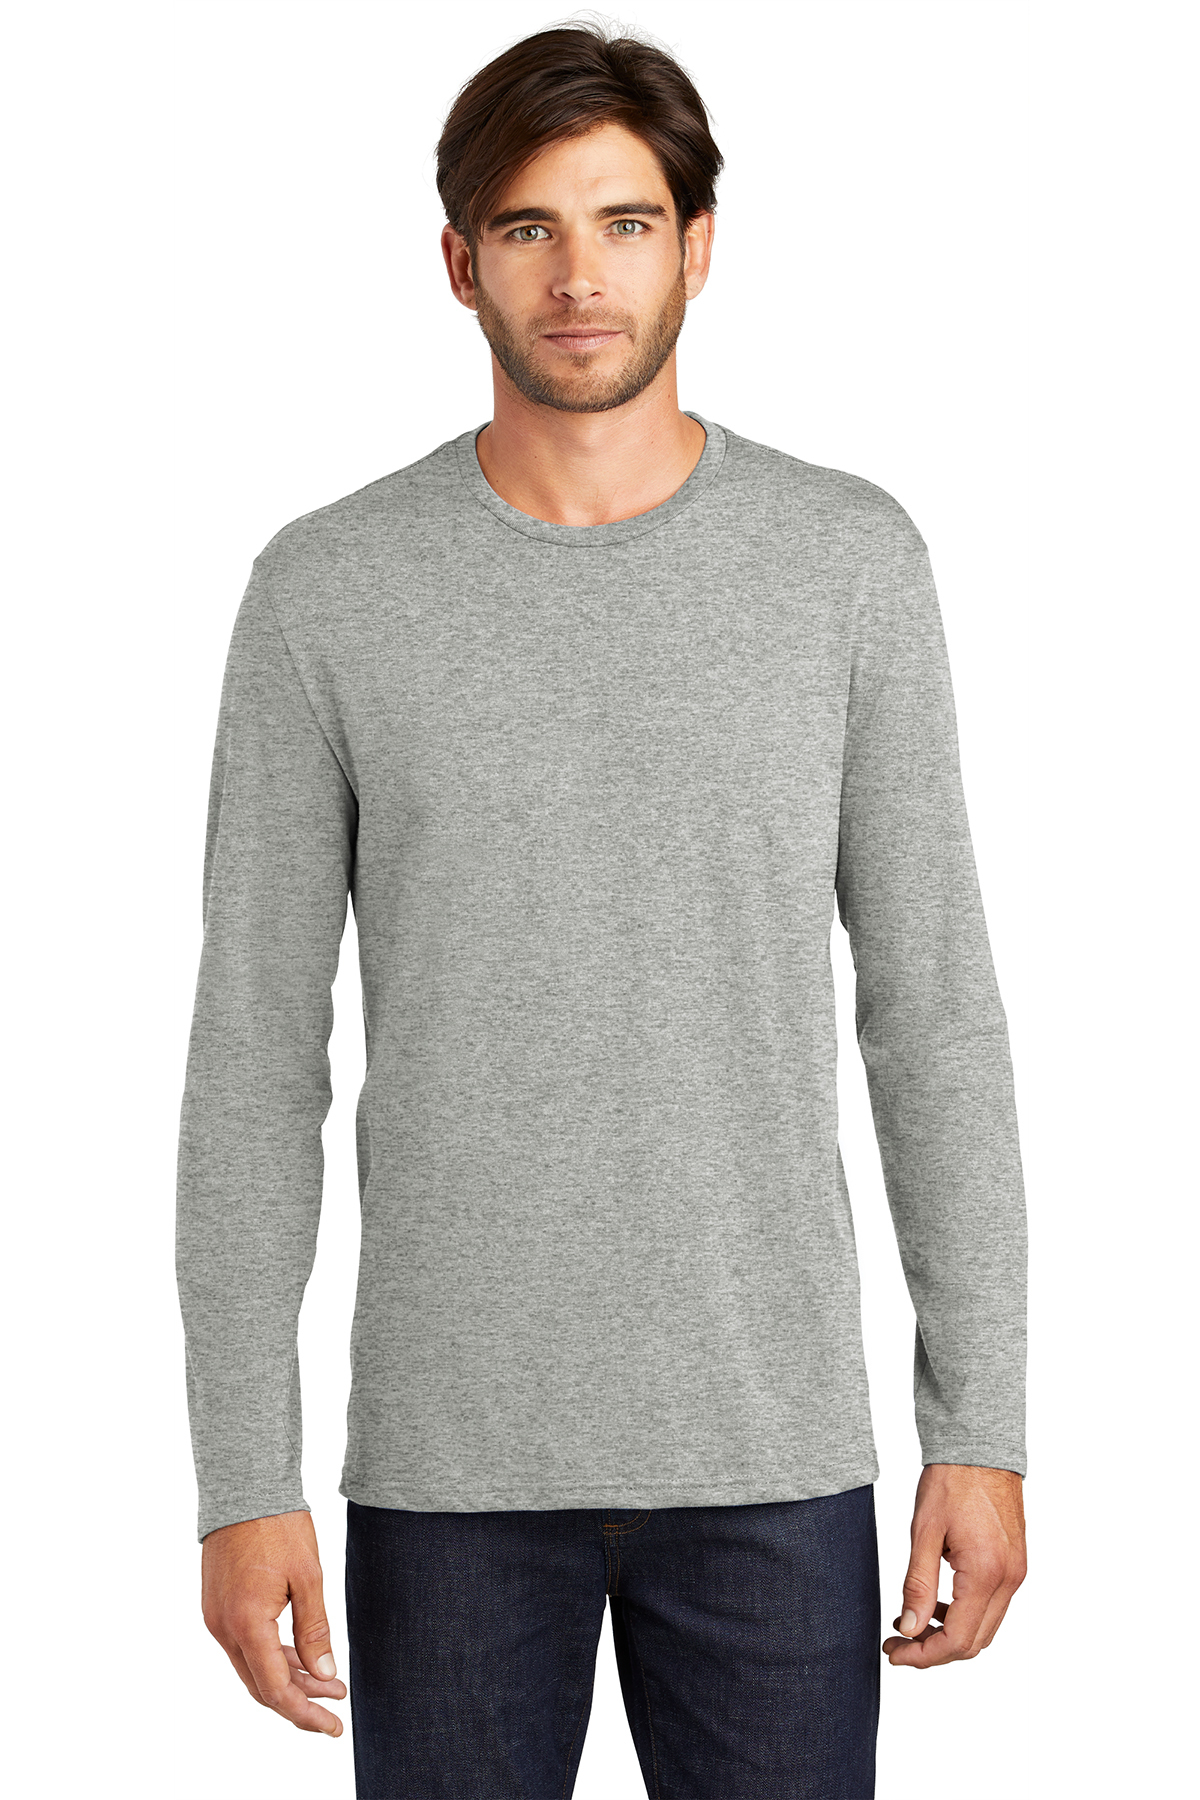 District Perfect Weight Long Sleeve Tee | Product | SanMar